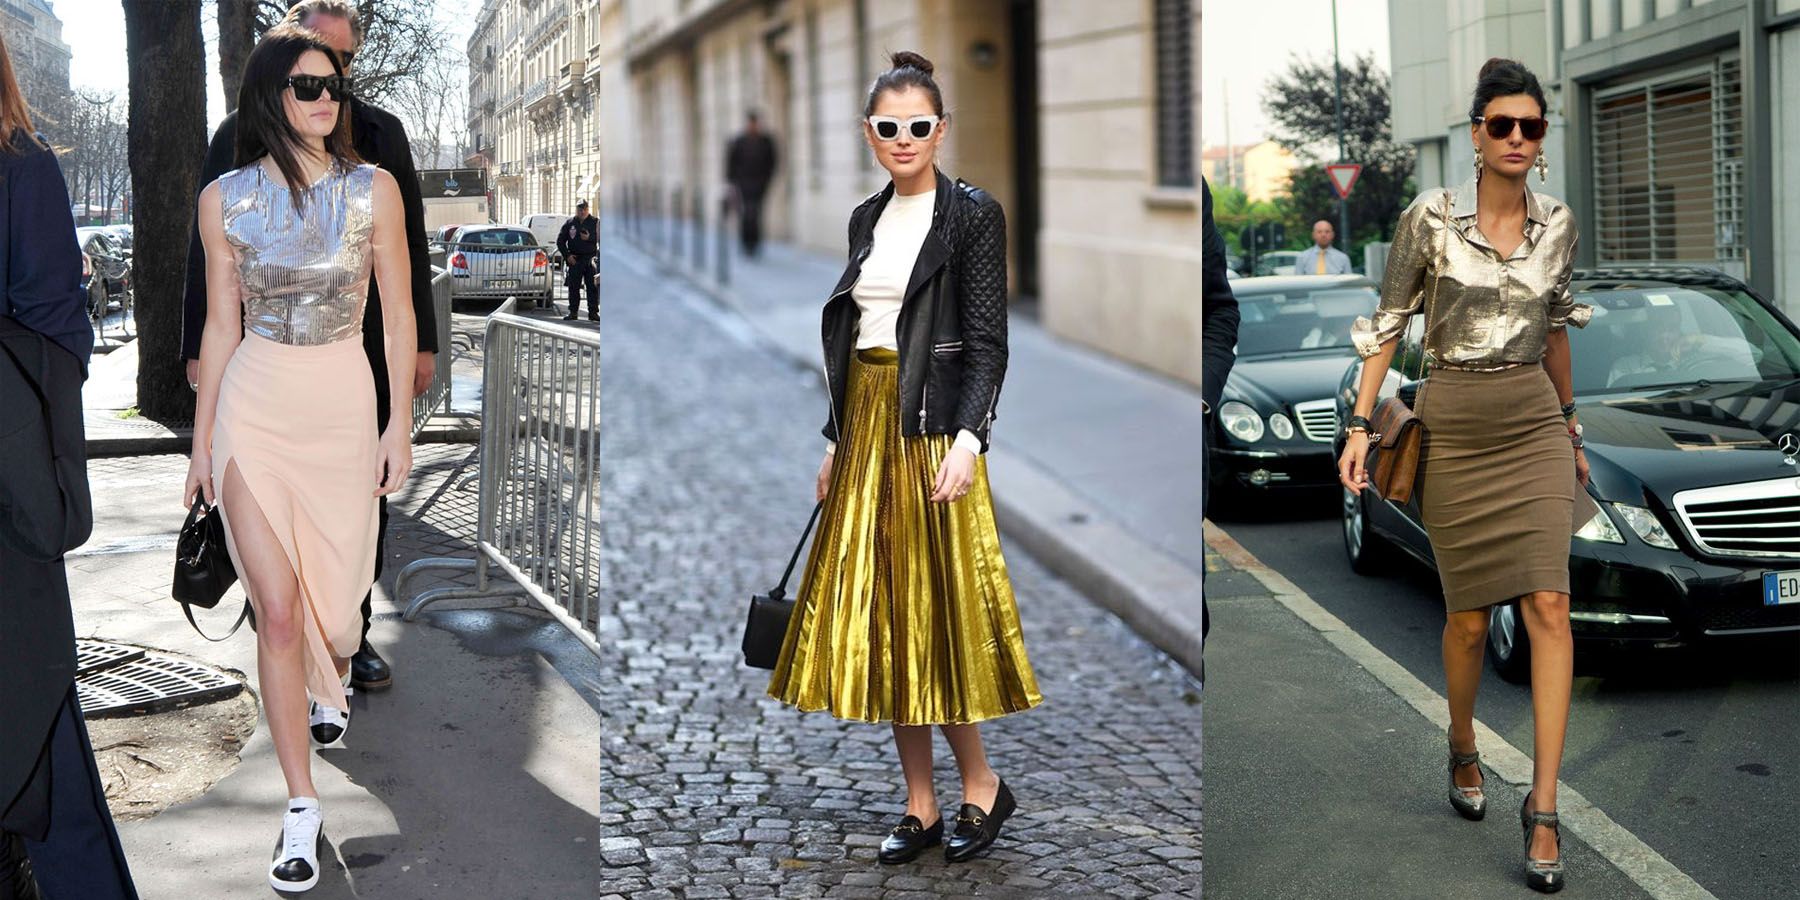 Metallic Touch Inspiration for Your Everyday Style